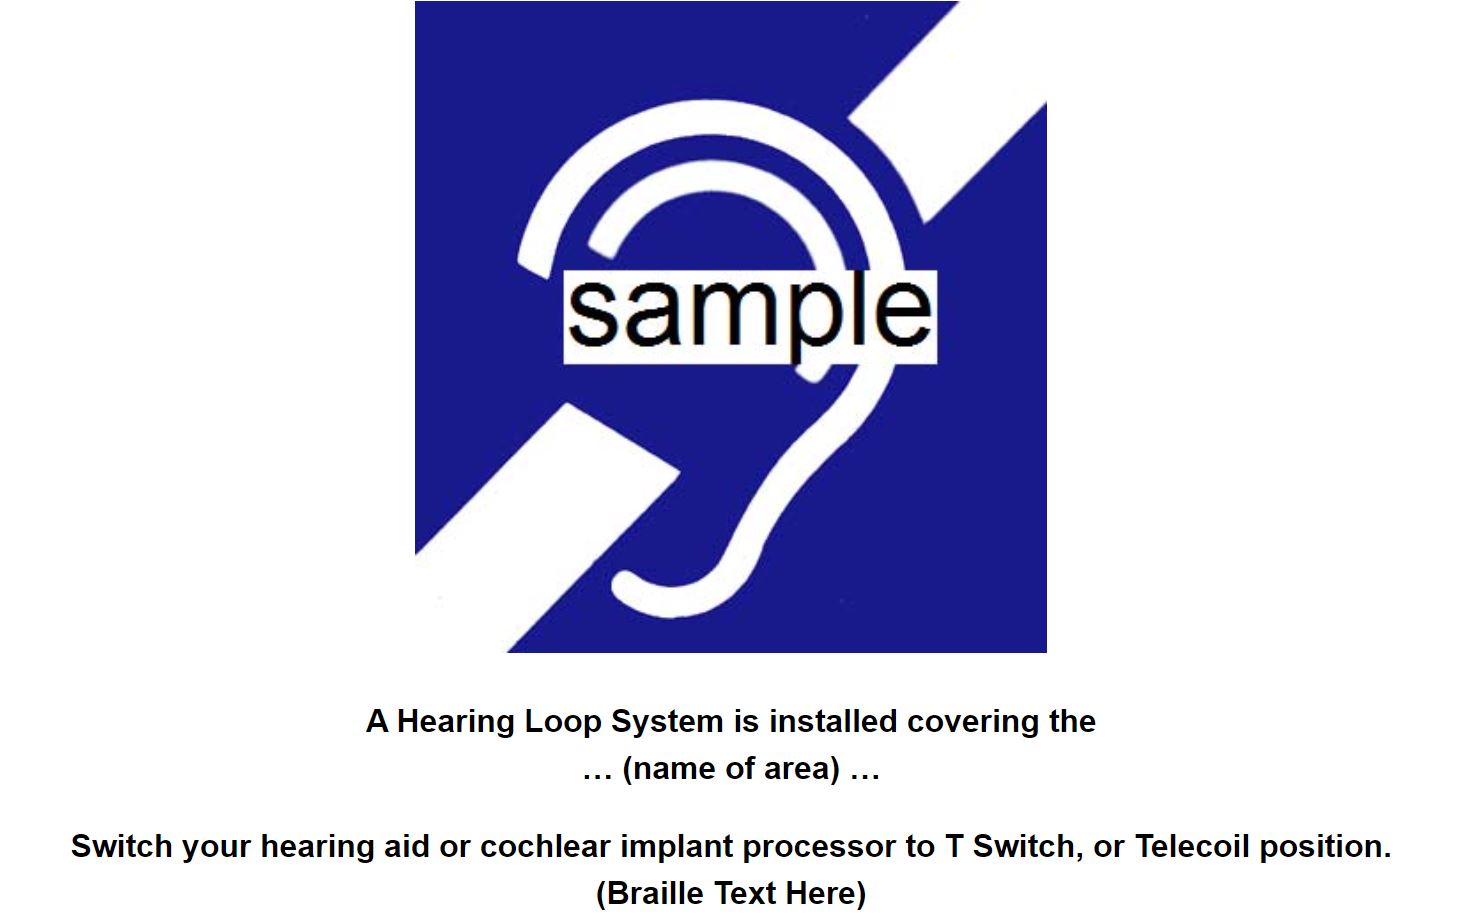 Sign template for a hearing loop system. The sign shows the international symbol for Deafness. The caption reads: A Hearing Loop System is installed covering the (name of area). Switch your hearing aid or cochlear implant processor to T Switch or Telecoil position. (Add braille text here).